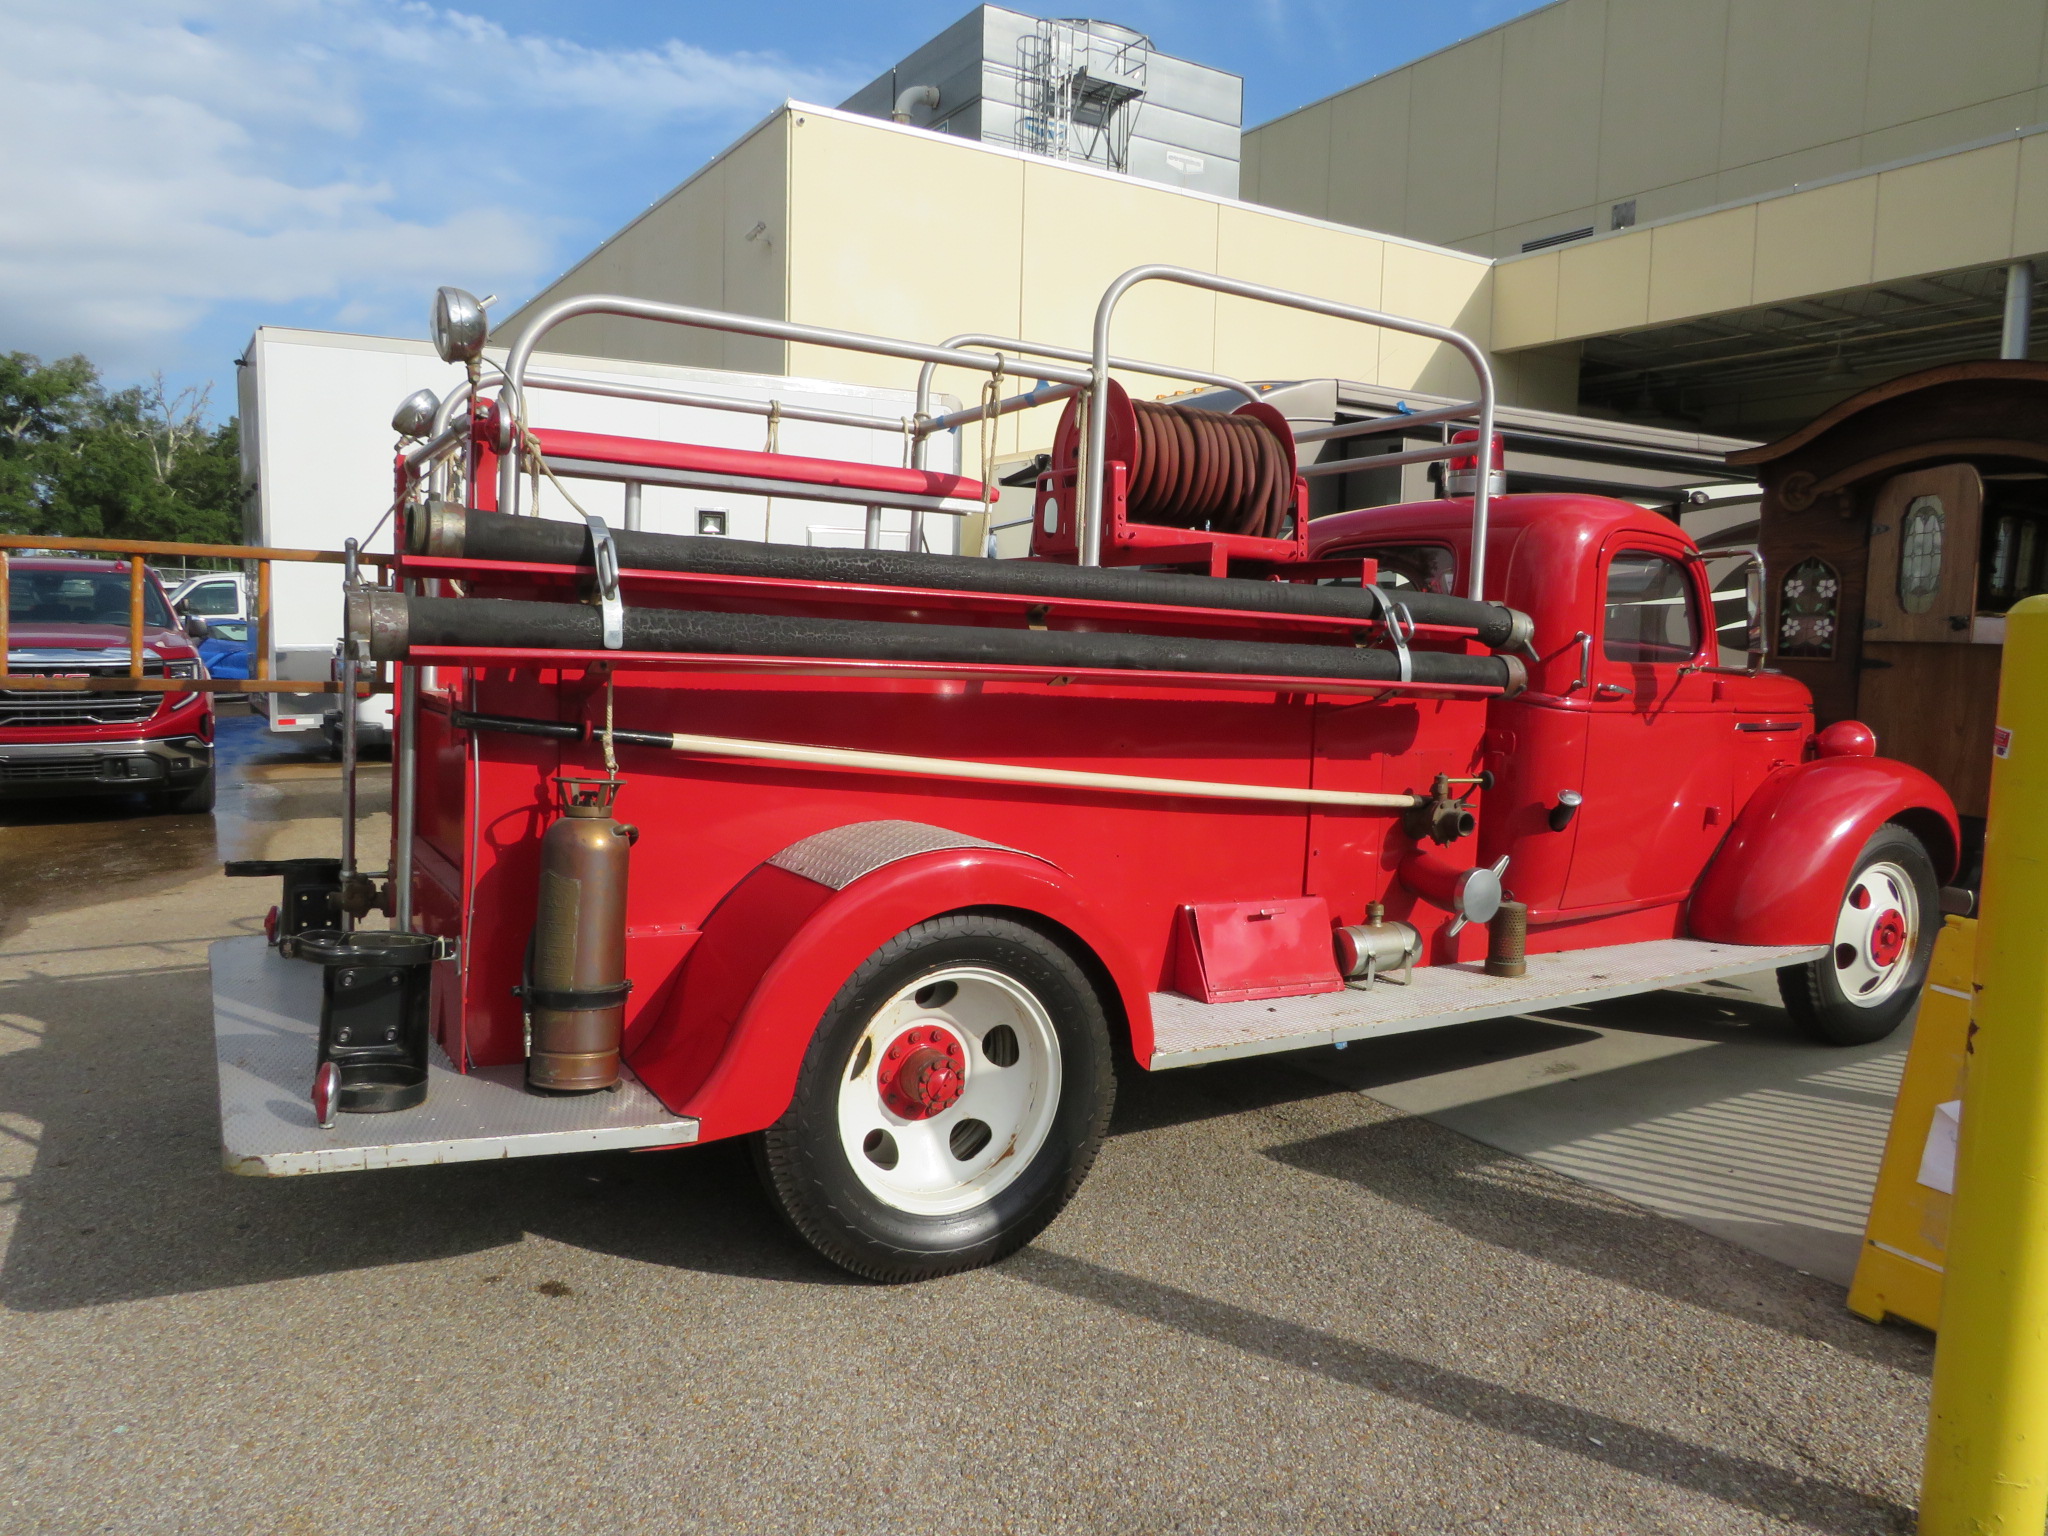 6th Image of a 1941 CHEVROLET FIRE TRUCK